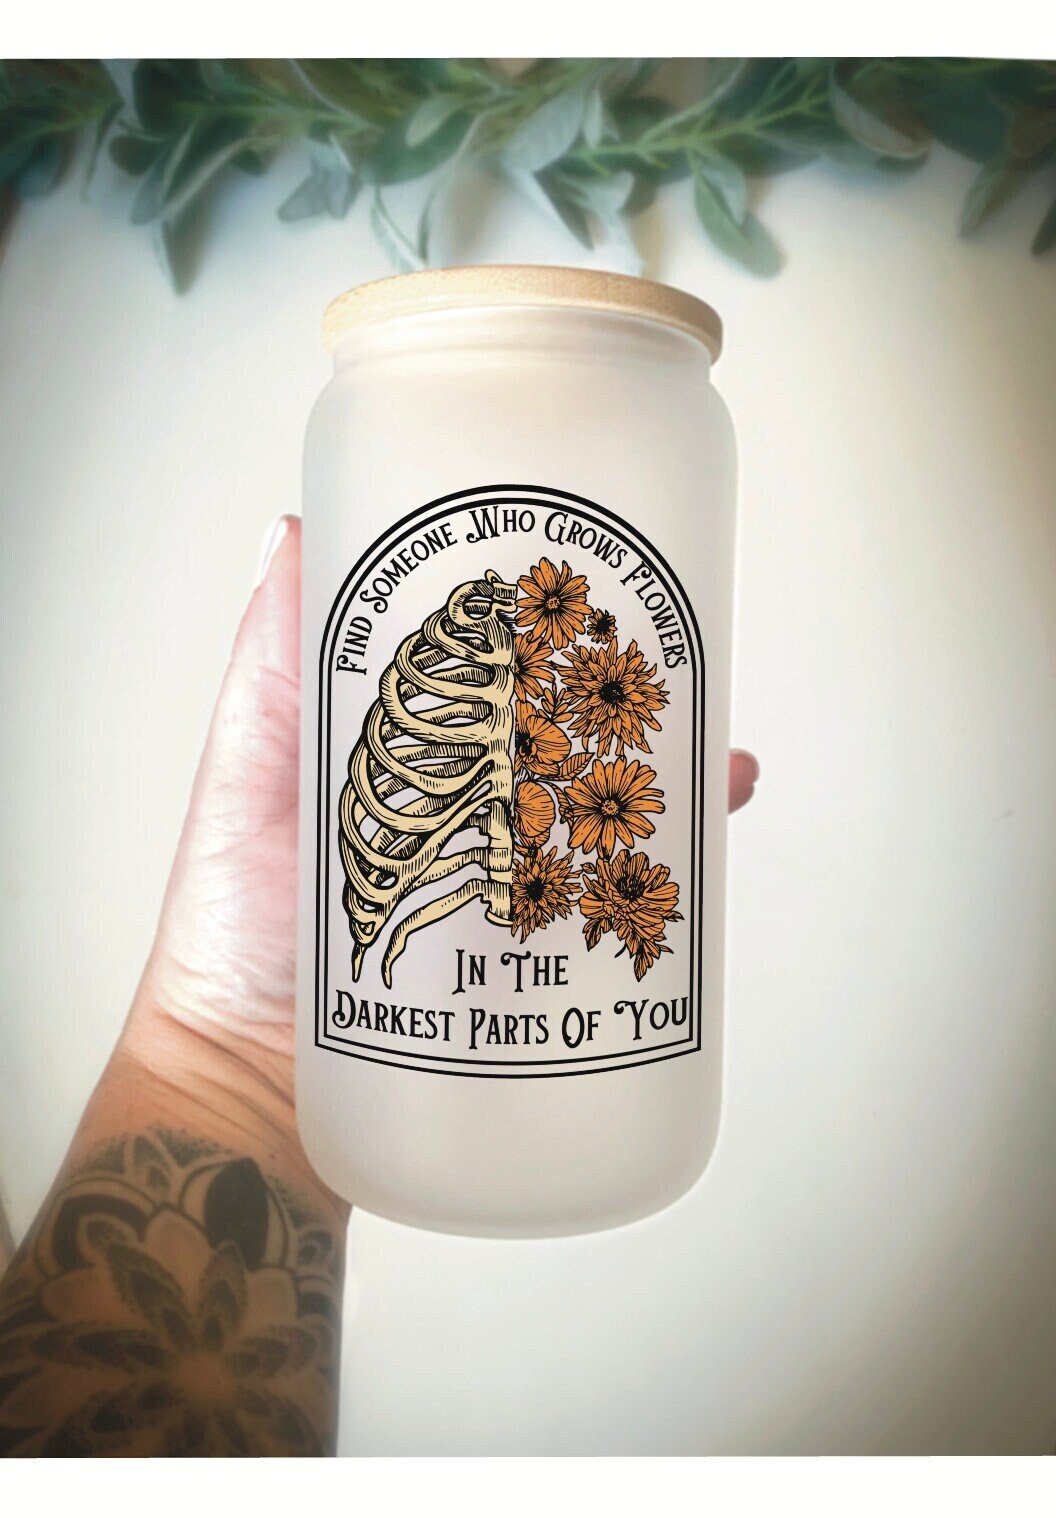 Zach Bryan Tumbler/ Zach Bryan Cup/ Find someone who grows flowers tumbler/ country music tumbler